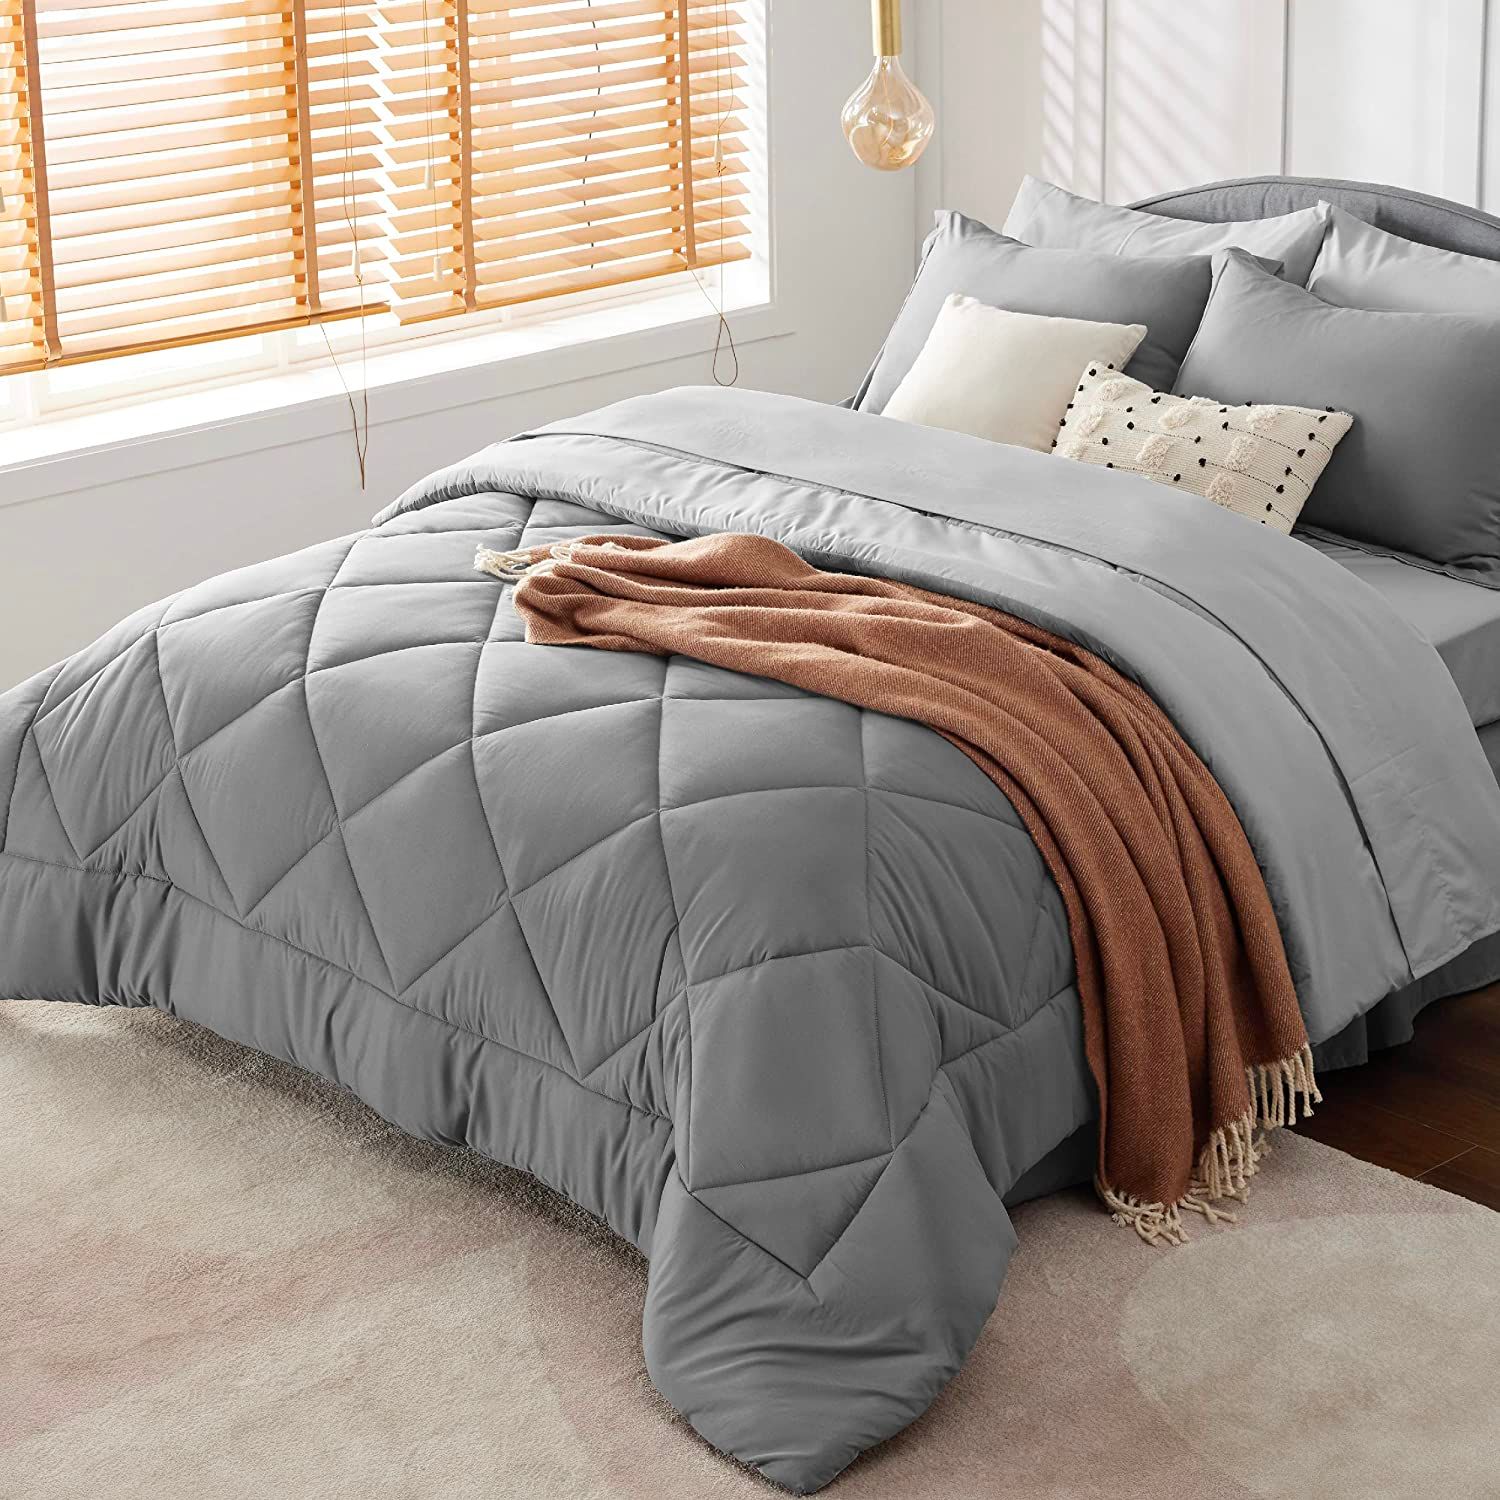 The Best Gifts for College Students: Twin XL Bedding Set 